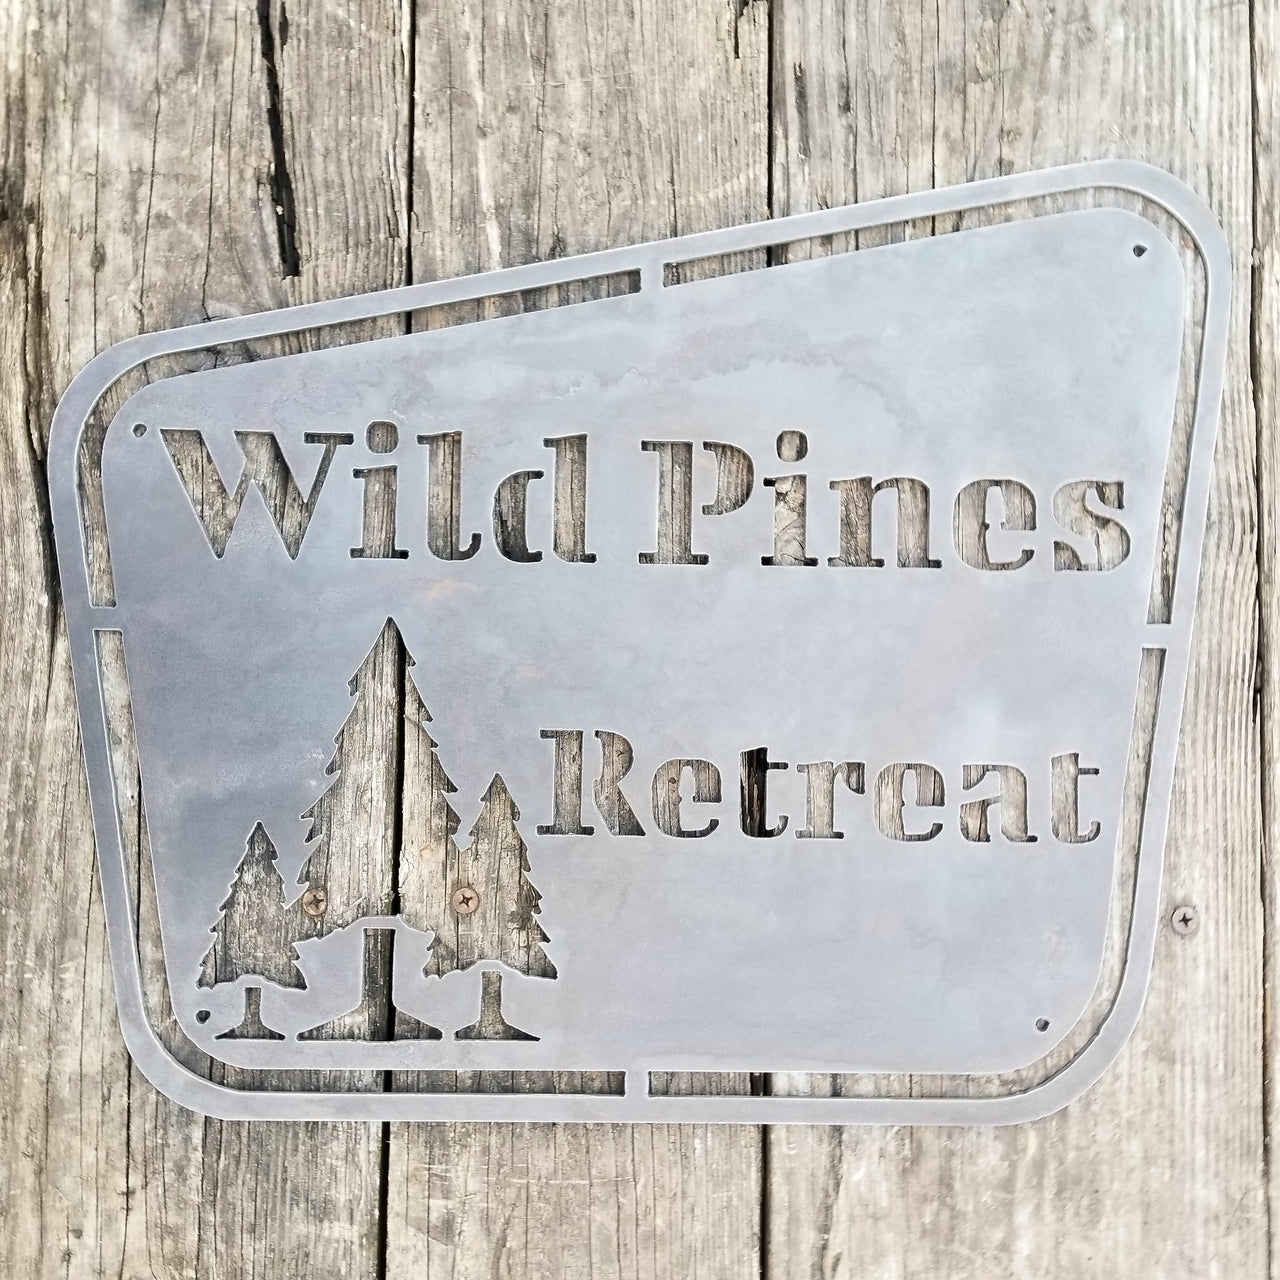 This sign has a vintage design and depicts a group of trees. It reads, "Wild Pines Retreat".